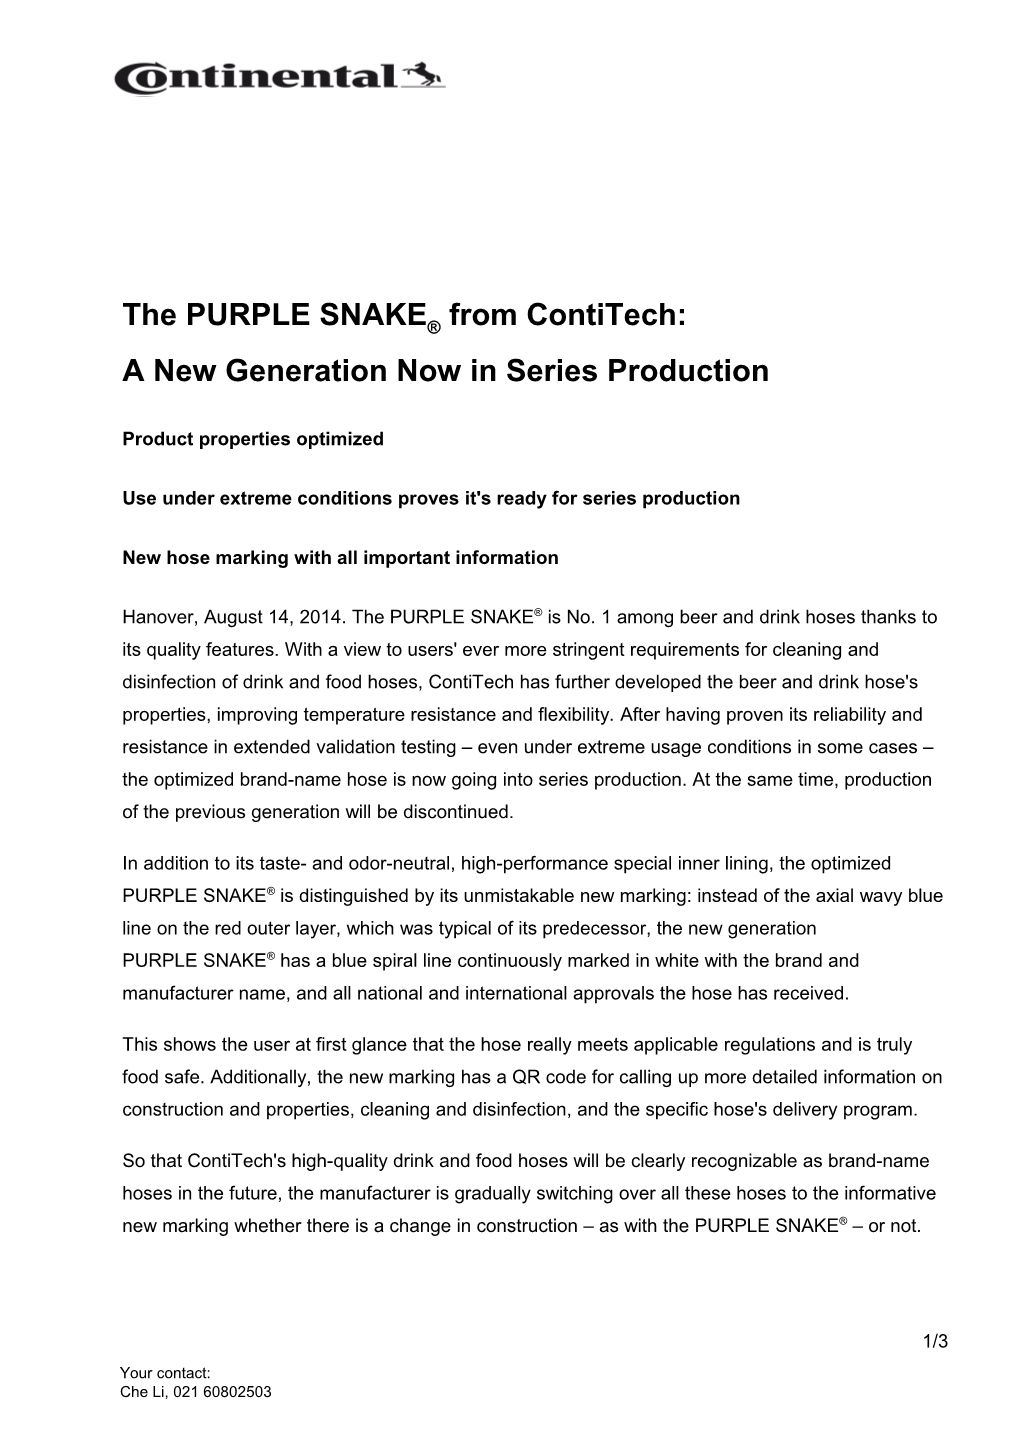 The Purple Snake from Contitech: a New Generation Now in Series Production